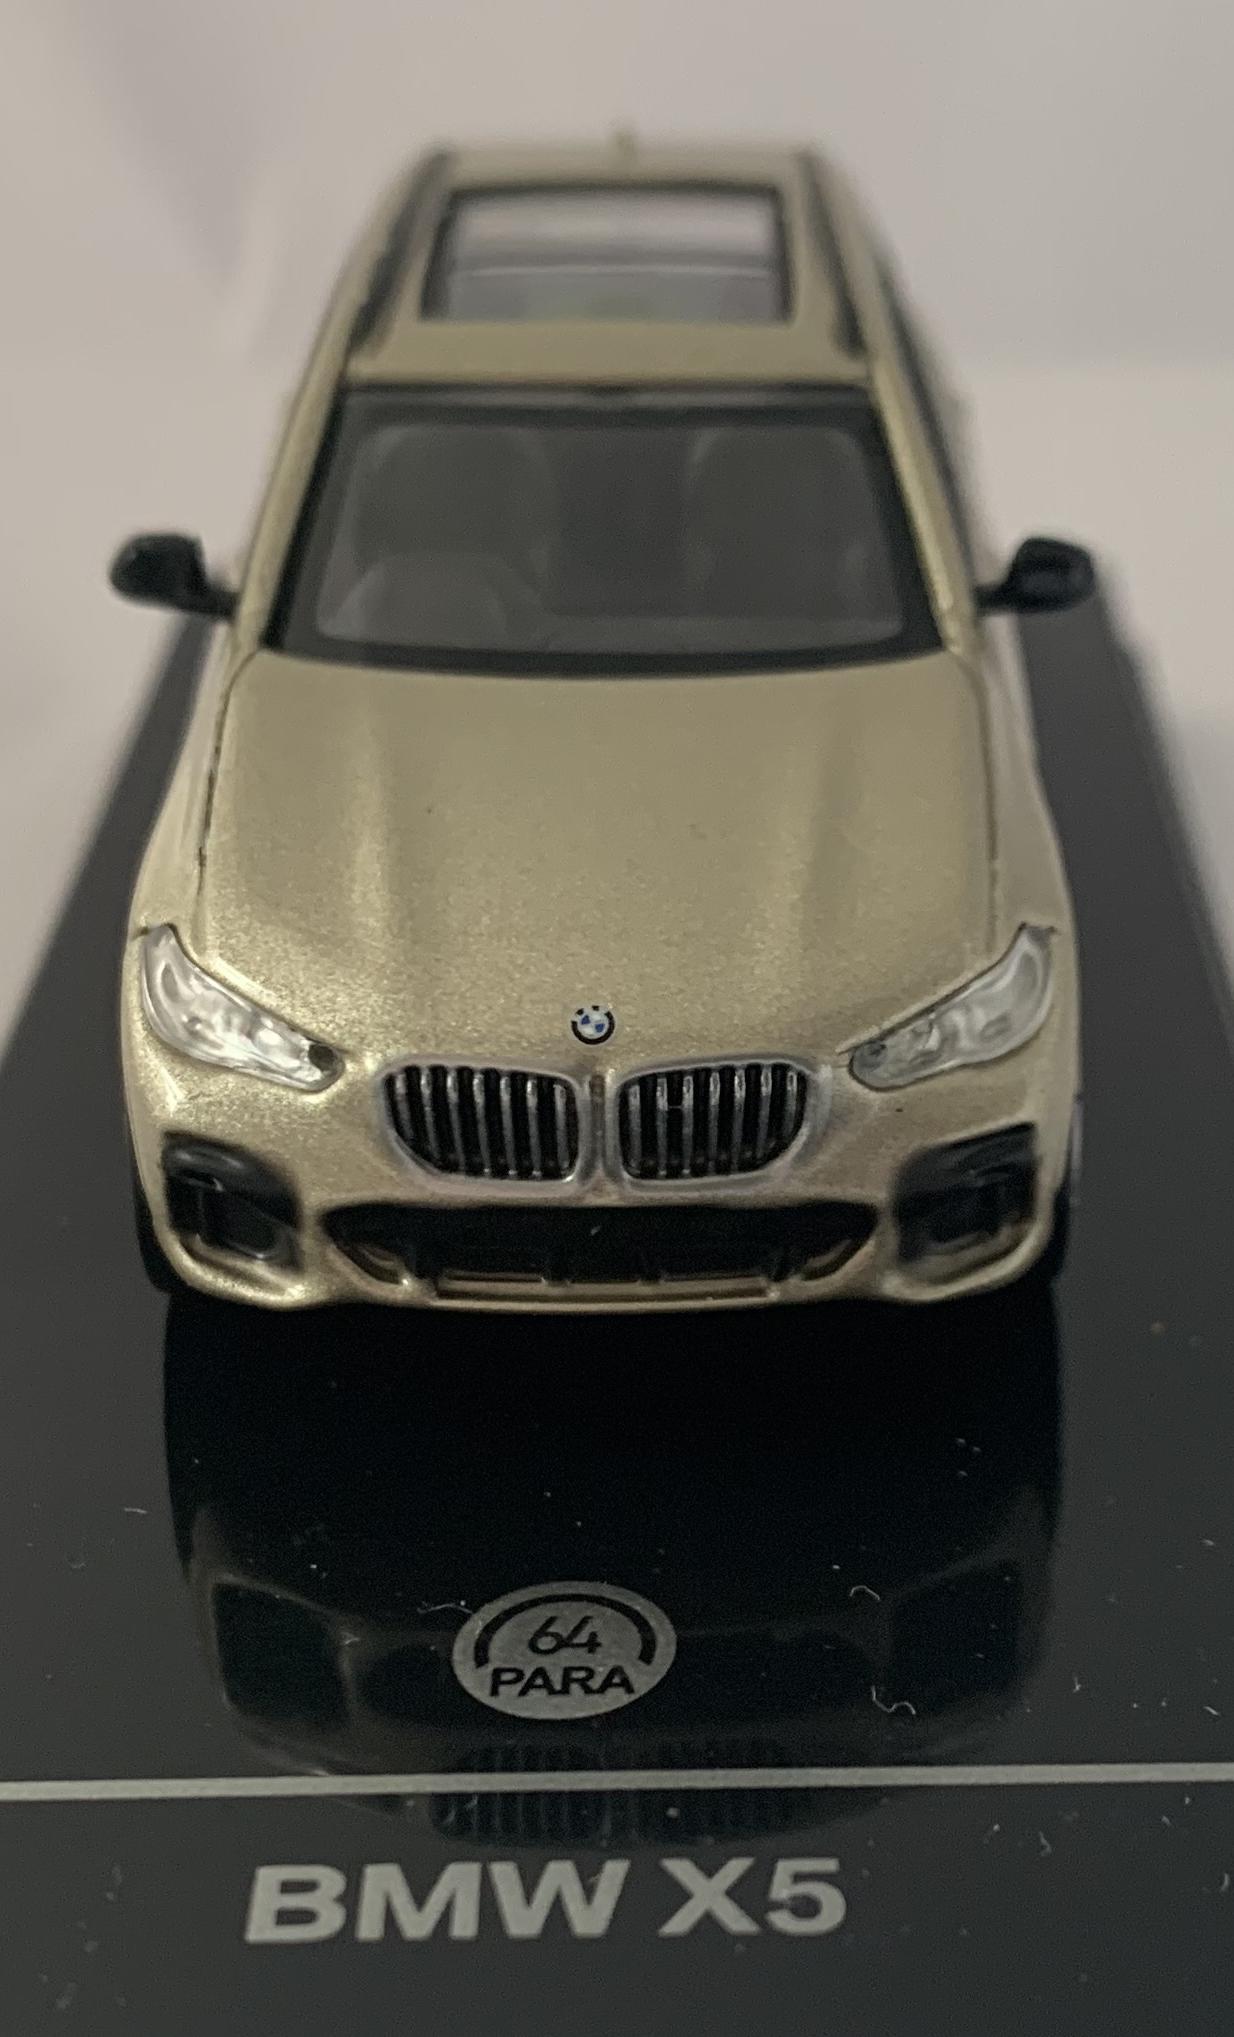 BMW X5 (G05) 2018 in sunstone metallic 1:64 scale model from Paragon Models